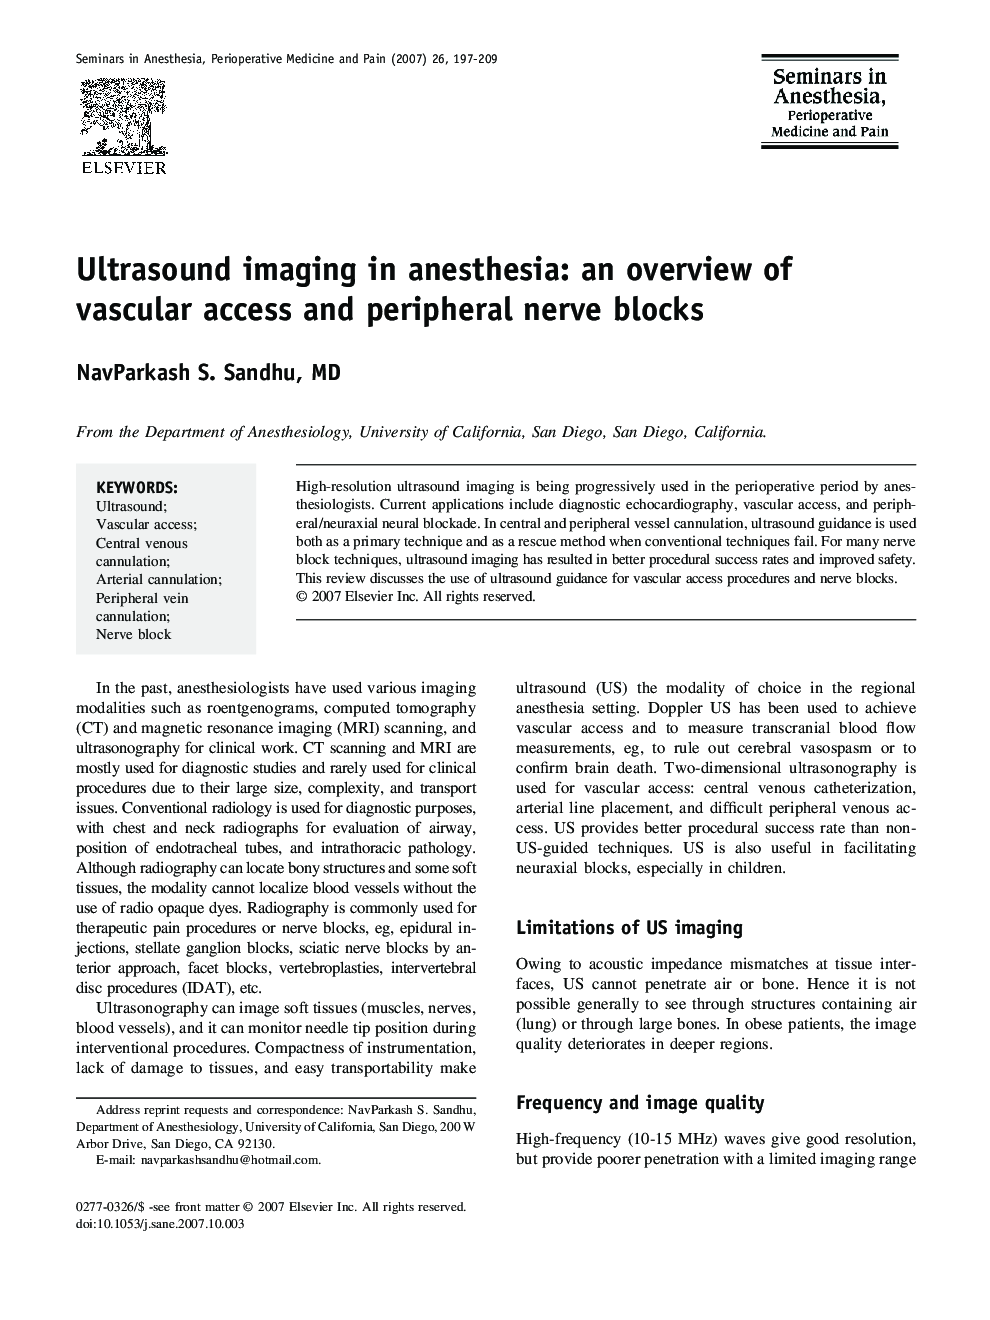 Ultrasound imaging in anesthesia: an overview of vascular access and peripheral nerve blocks